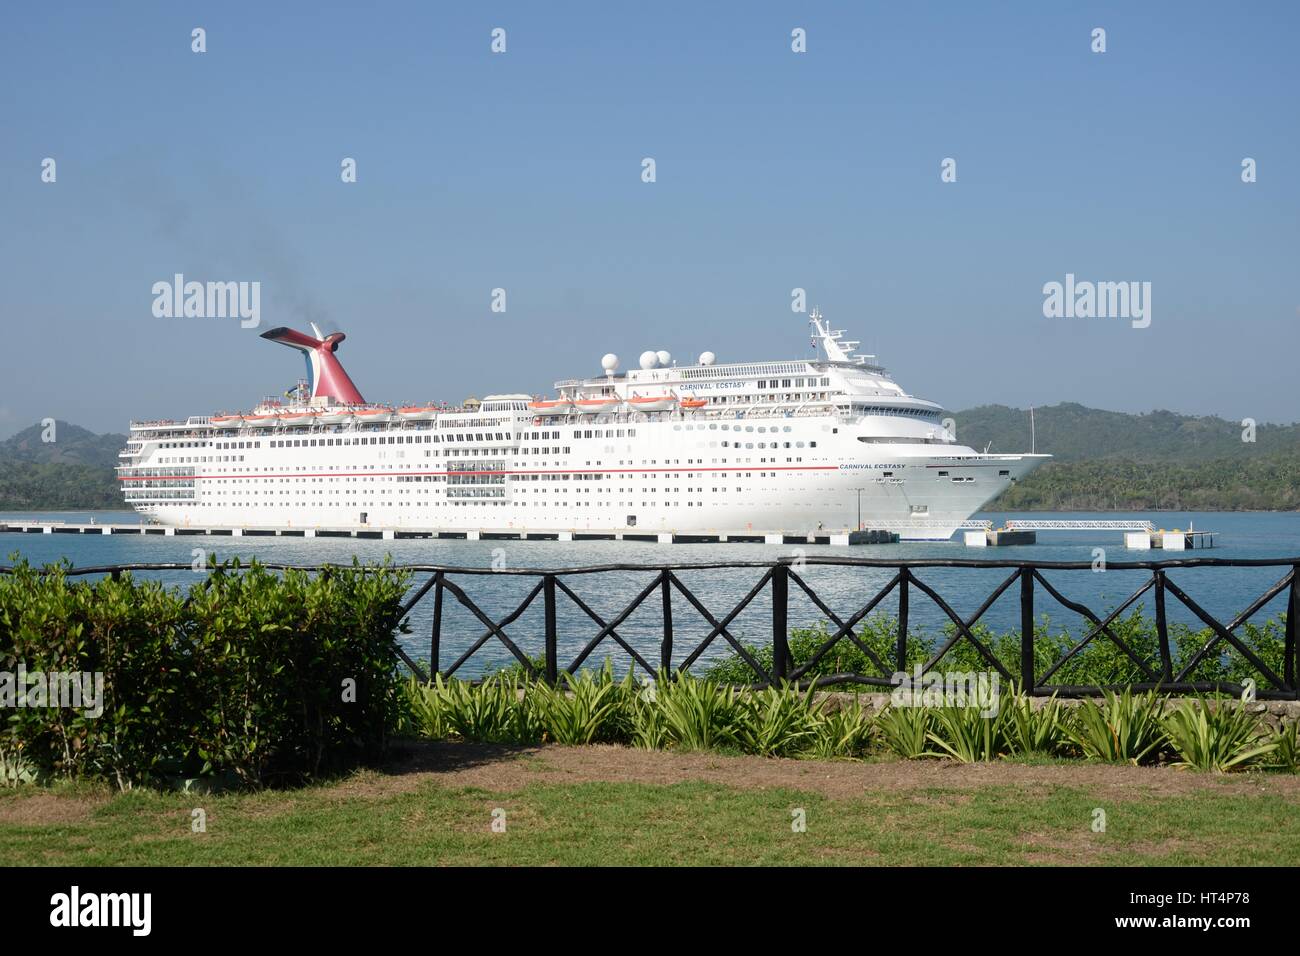 AMBER COVE DOMINICAN REPUBLIC 9 FEBRUARY  2016: Carnival ecstasy Cruise Ship in port with land in foreground Stock Photo